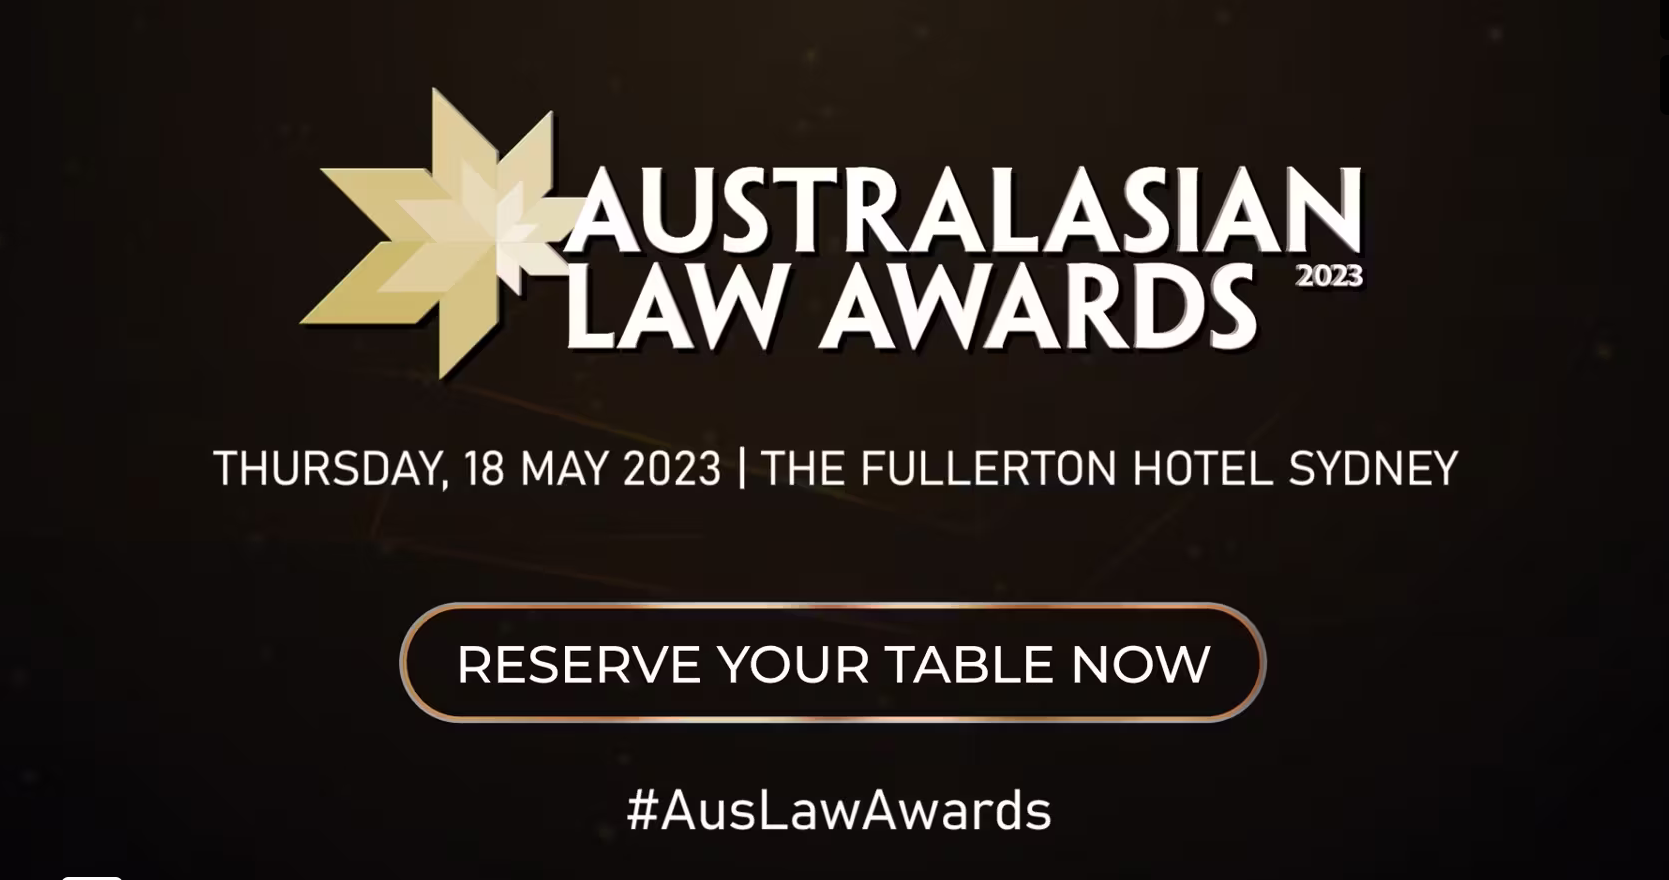 Join us for an unforgettable night at the Australasian Law Awards 2023